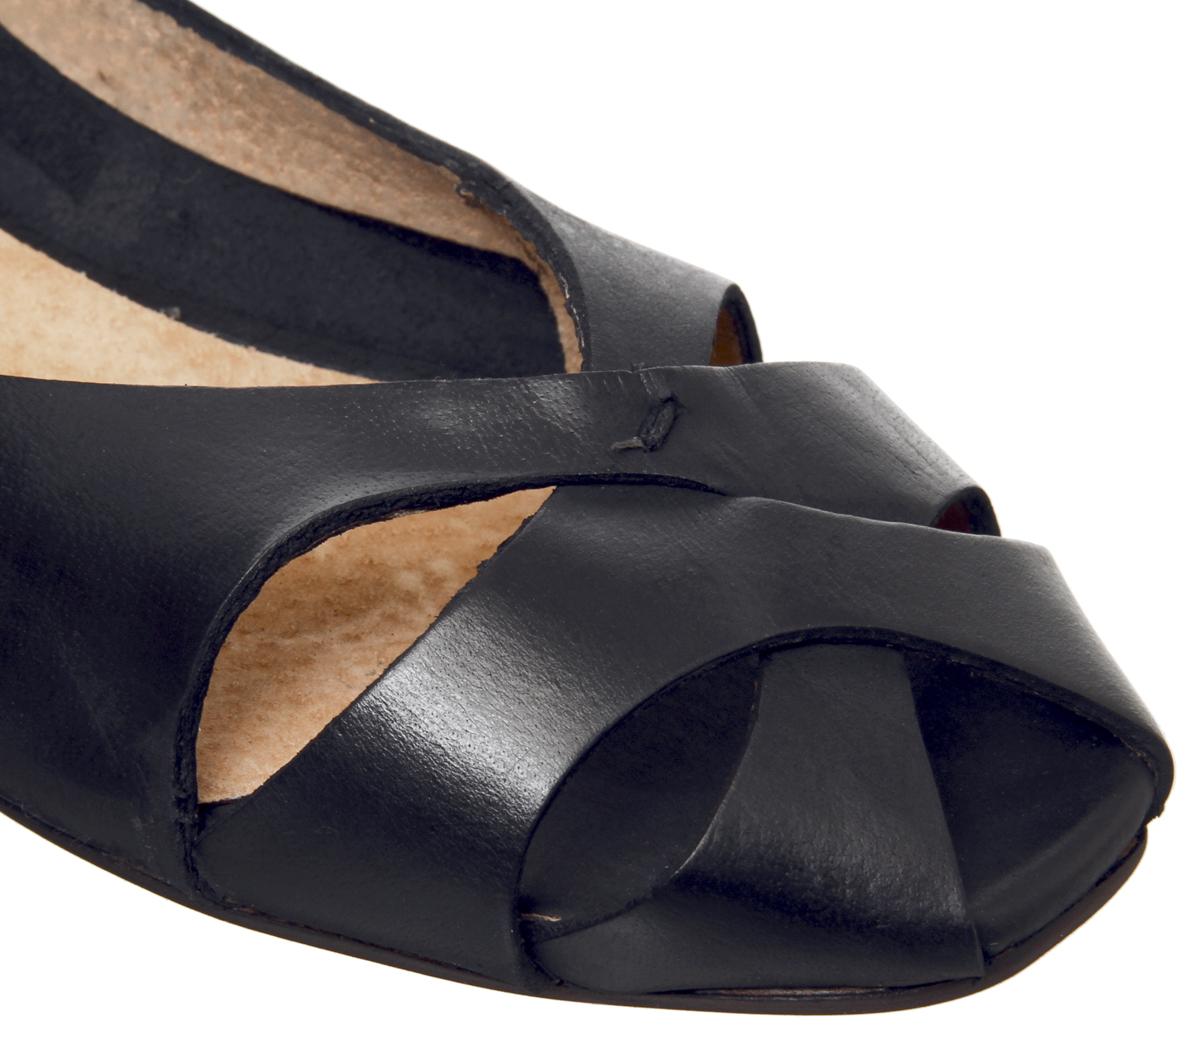 OFFICE Fickle Peep Toe Flats Black Leather - Flat Shoes for Women